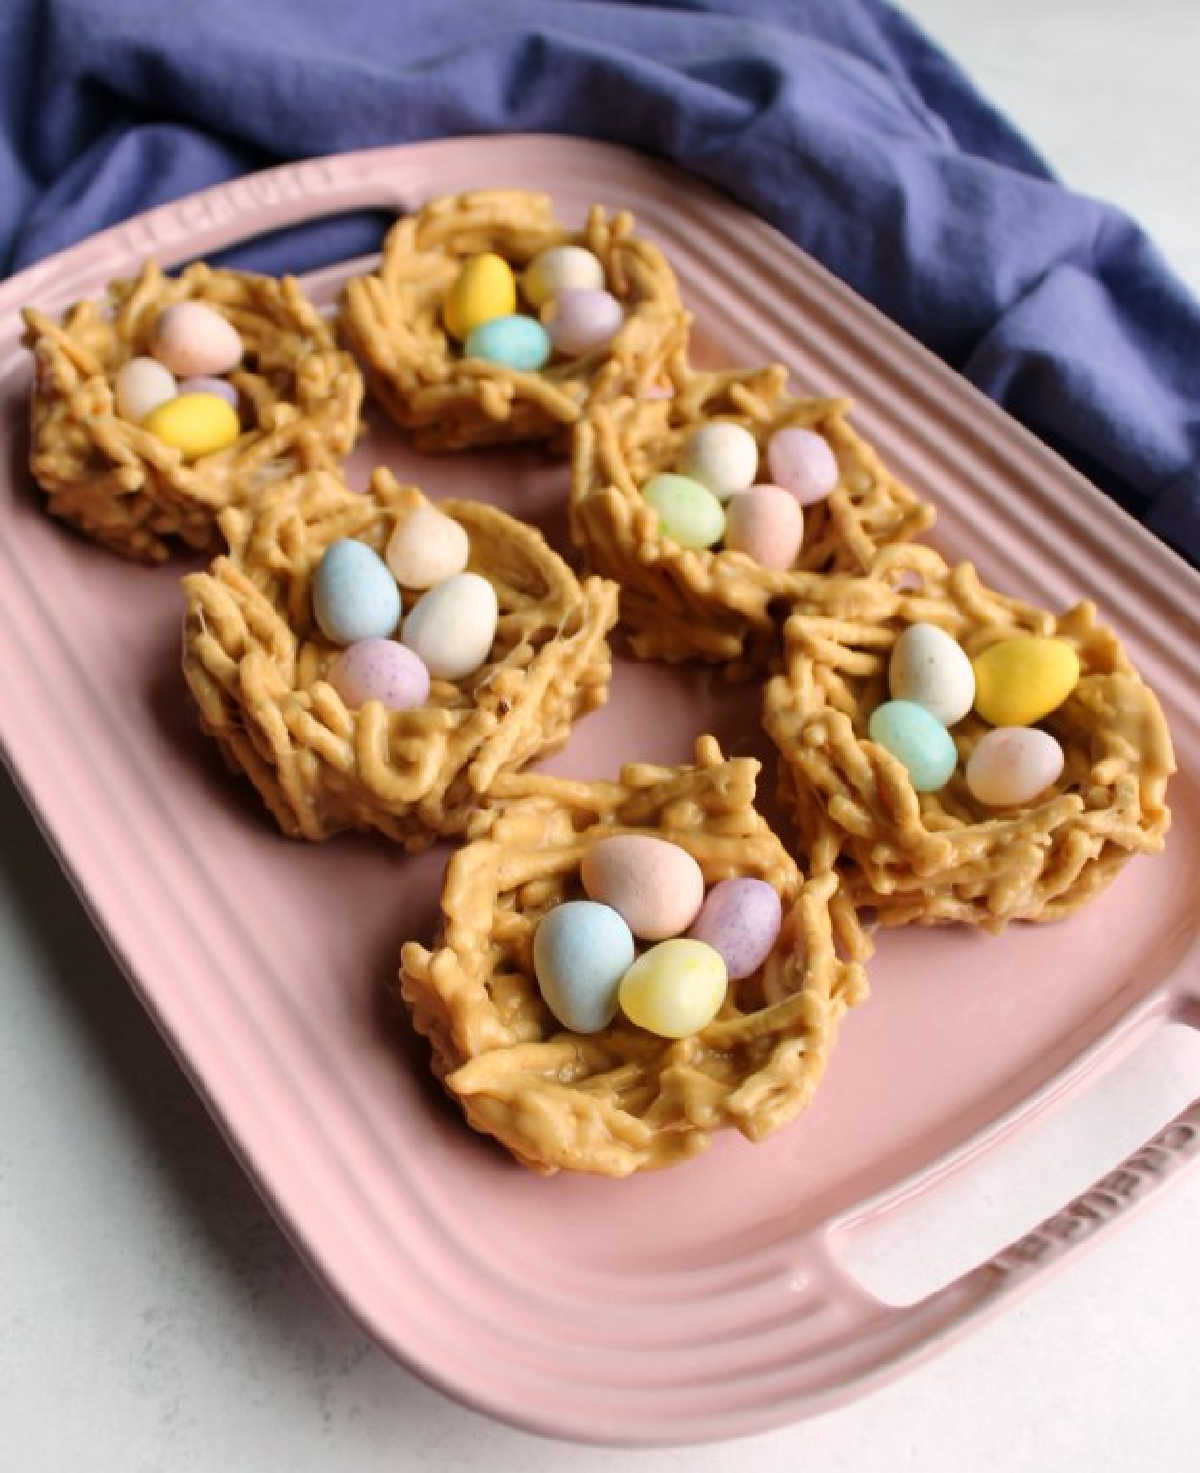 Pink platter filled with peanut butter and marshmallow chow mein nests with candy eggs inside.